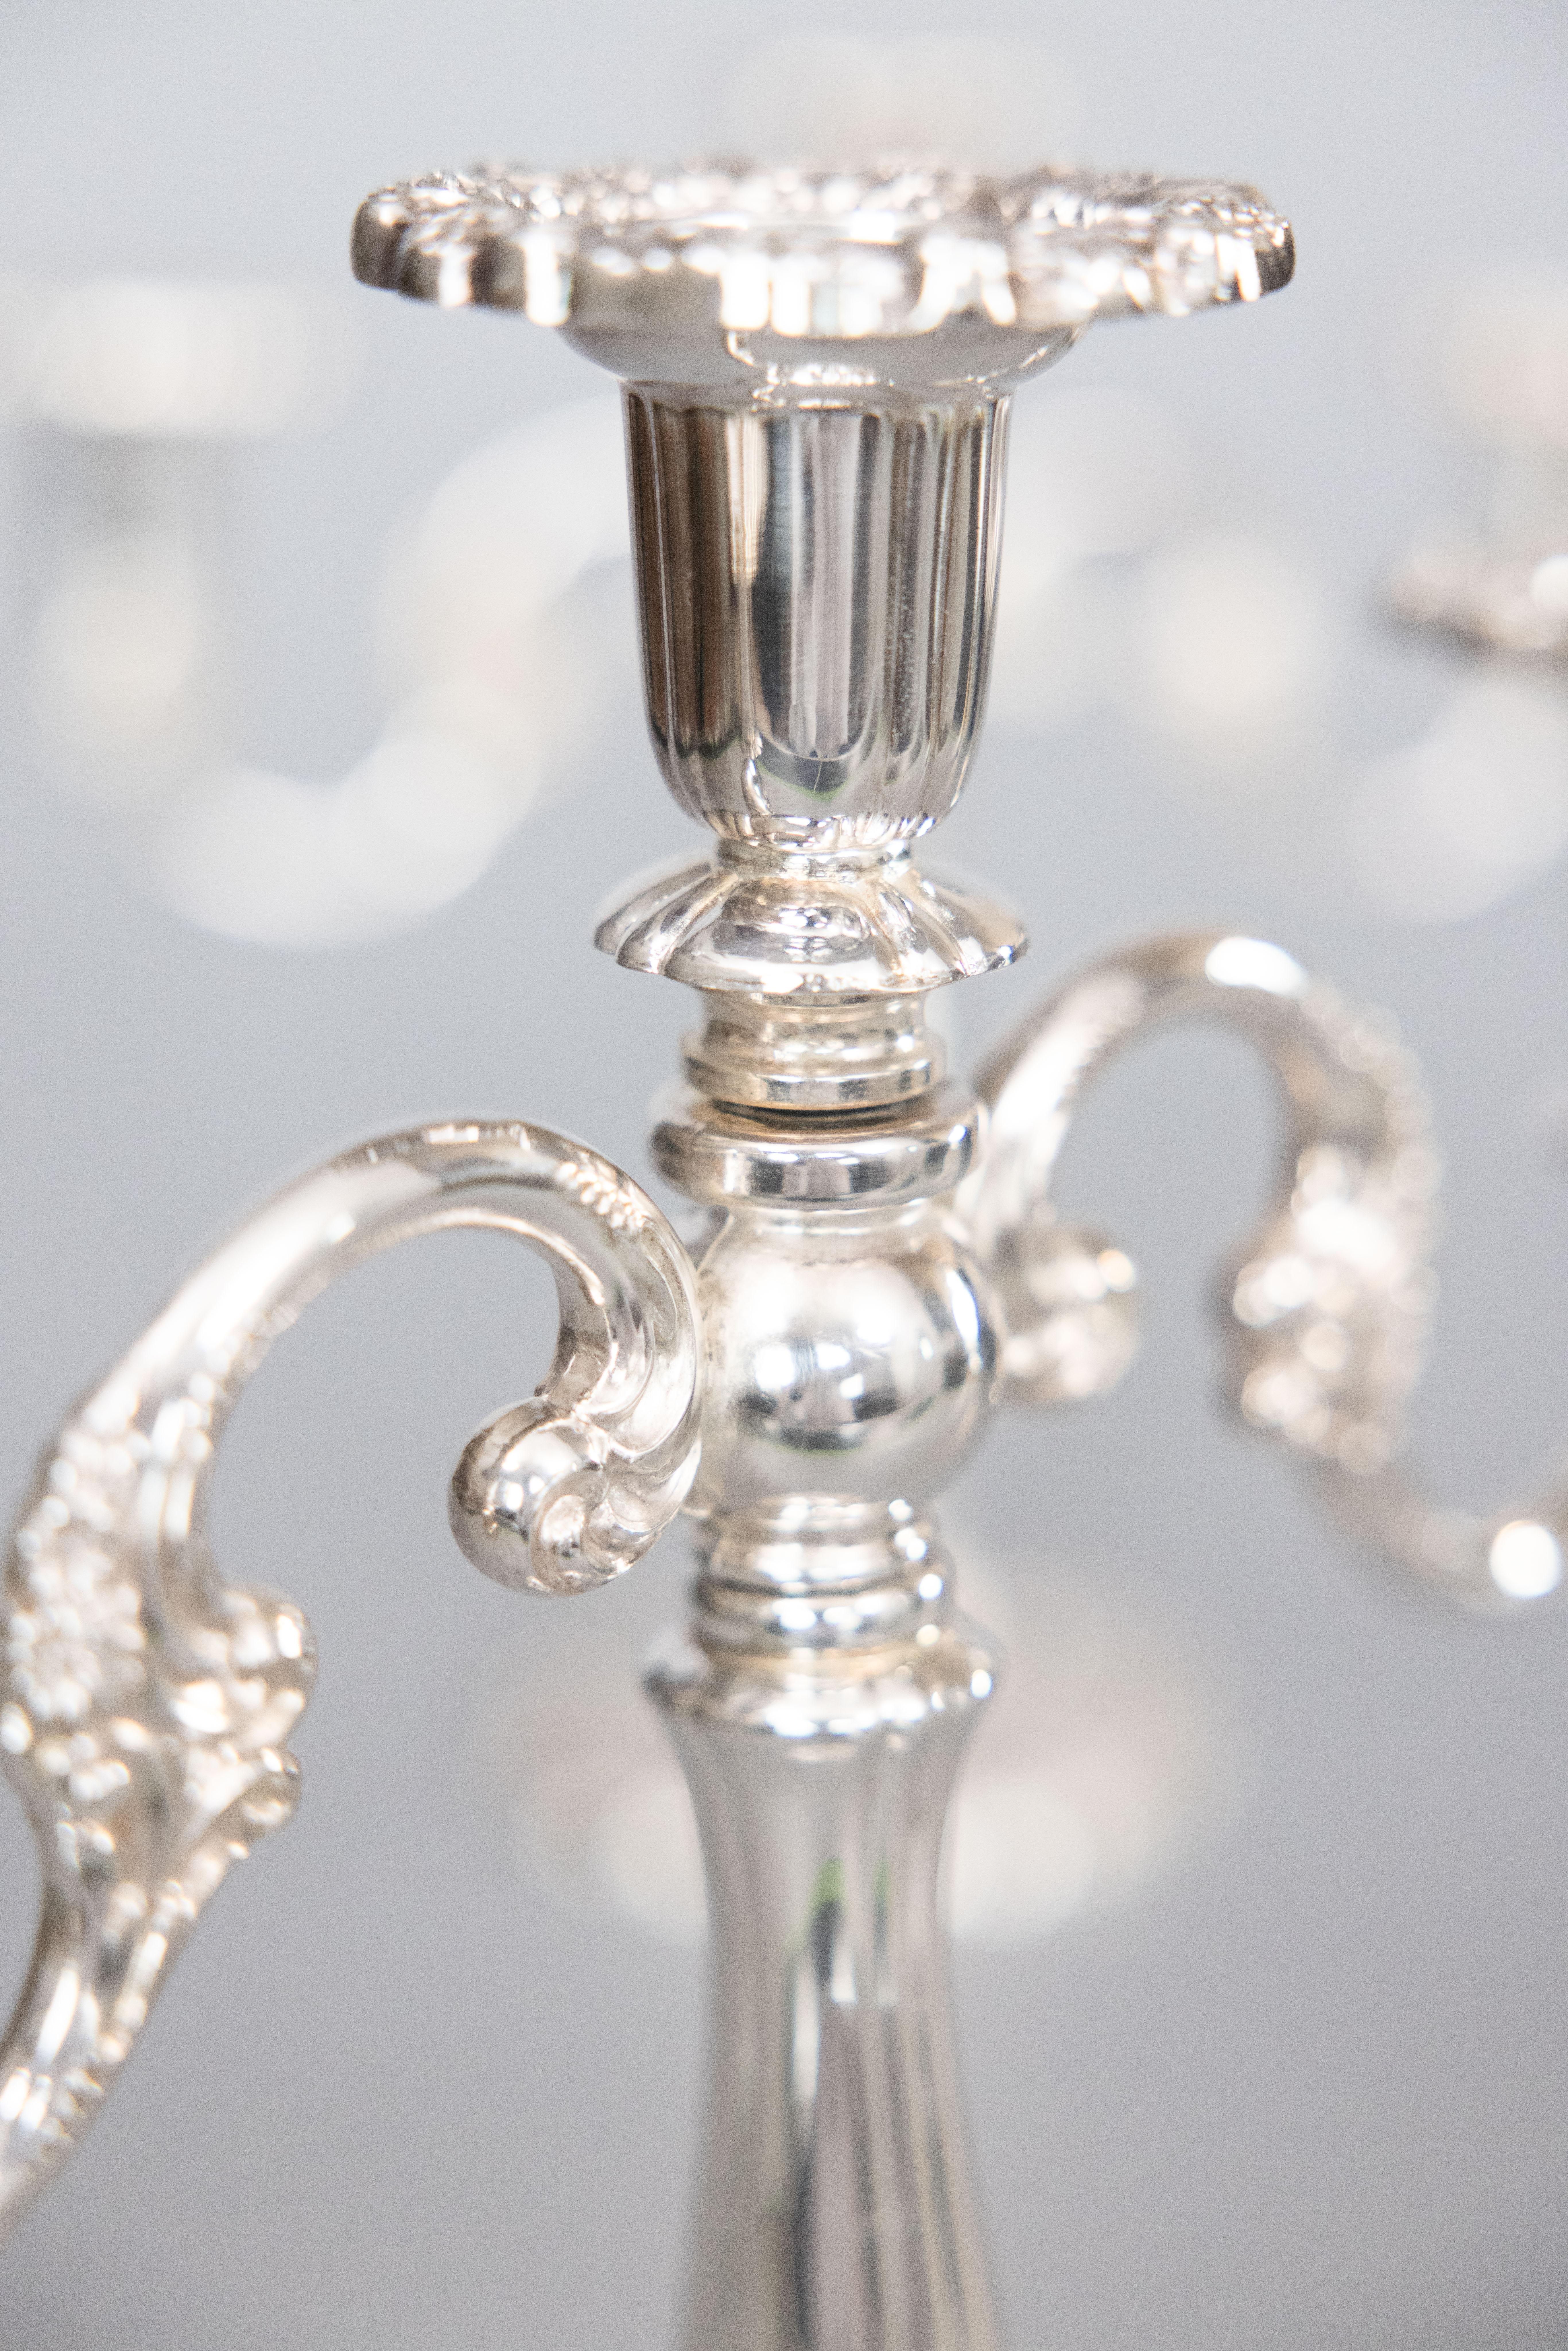 Pair of Mid 20th Century Italian Silver Plate Candelabras For Sale 3